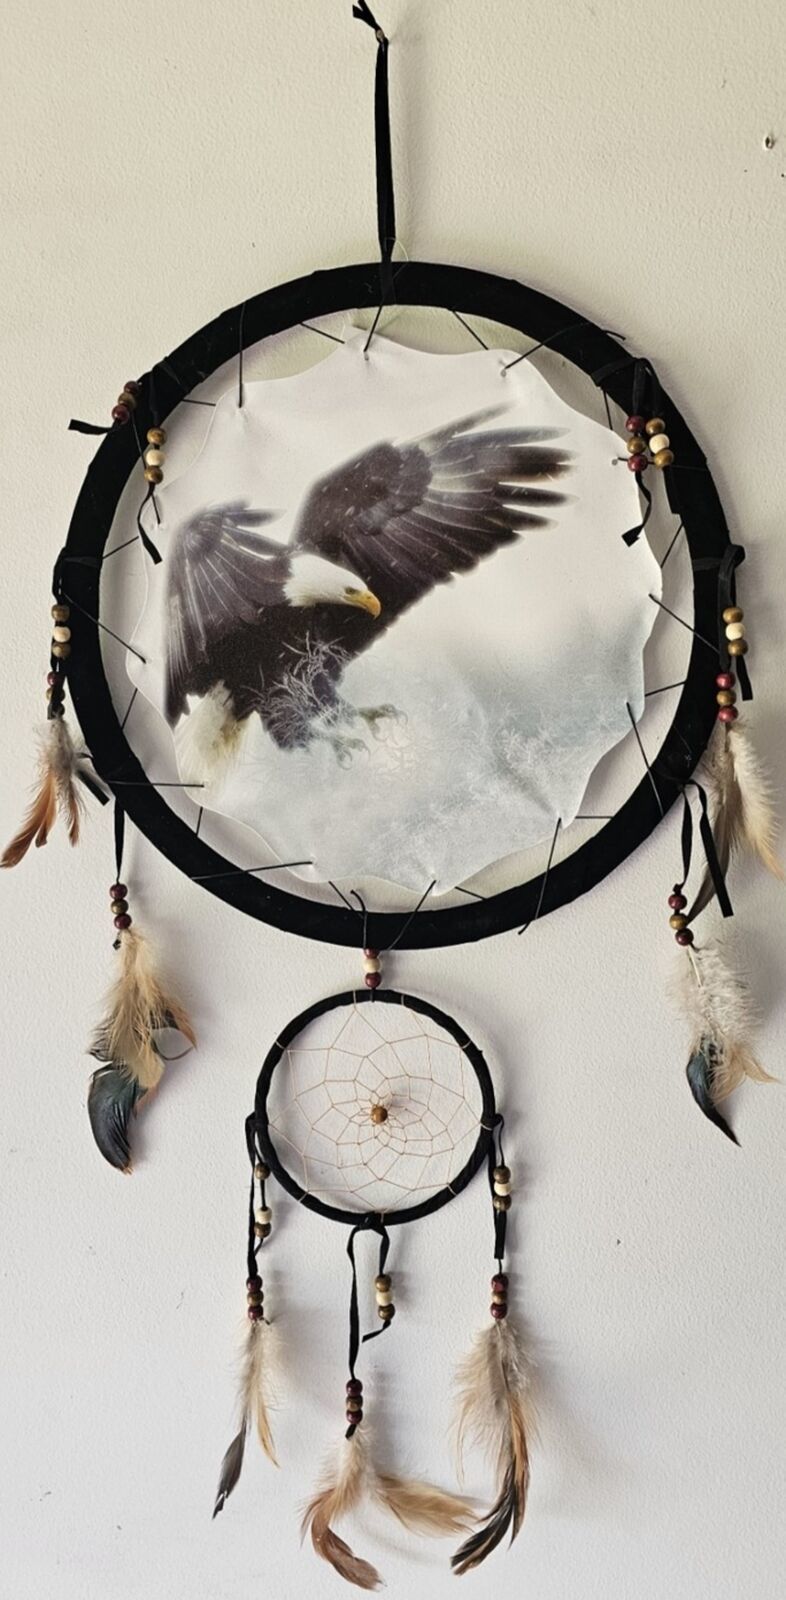 Primary image for EAGLE FLYING CLAWS SKY BIRD INDIAN DREAMCATCHER 2 RINGS MEDIUM